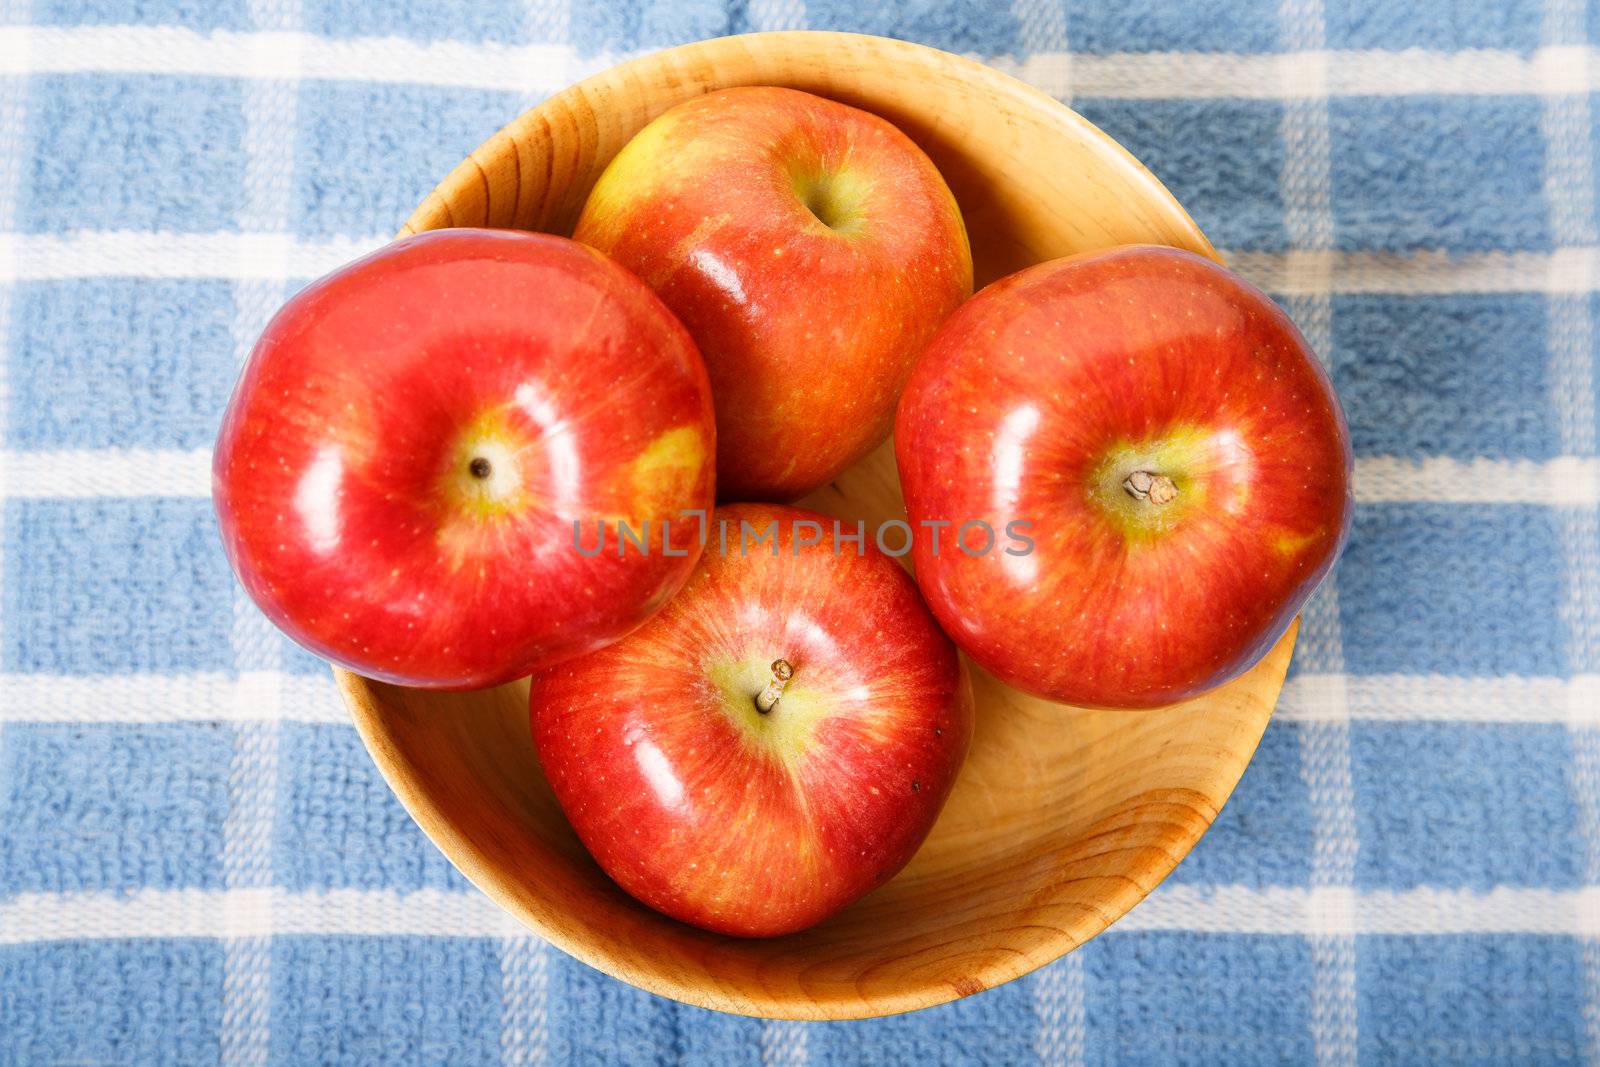 Red Apples in a Wood Bowl on Blue Plaid Placemat from Above